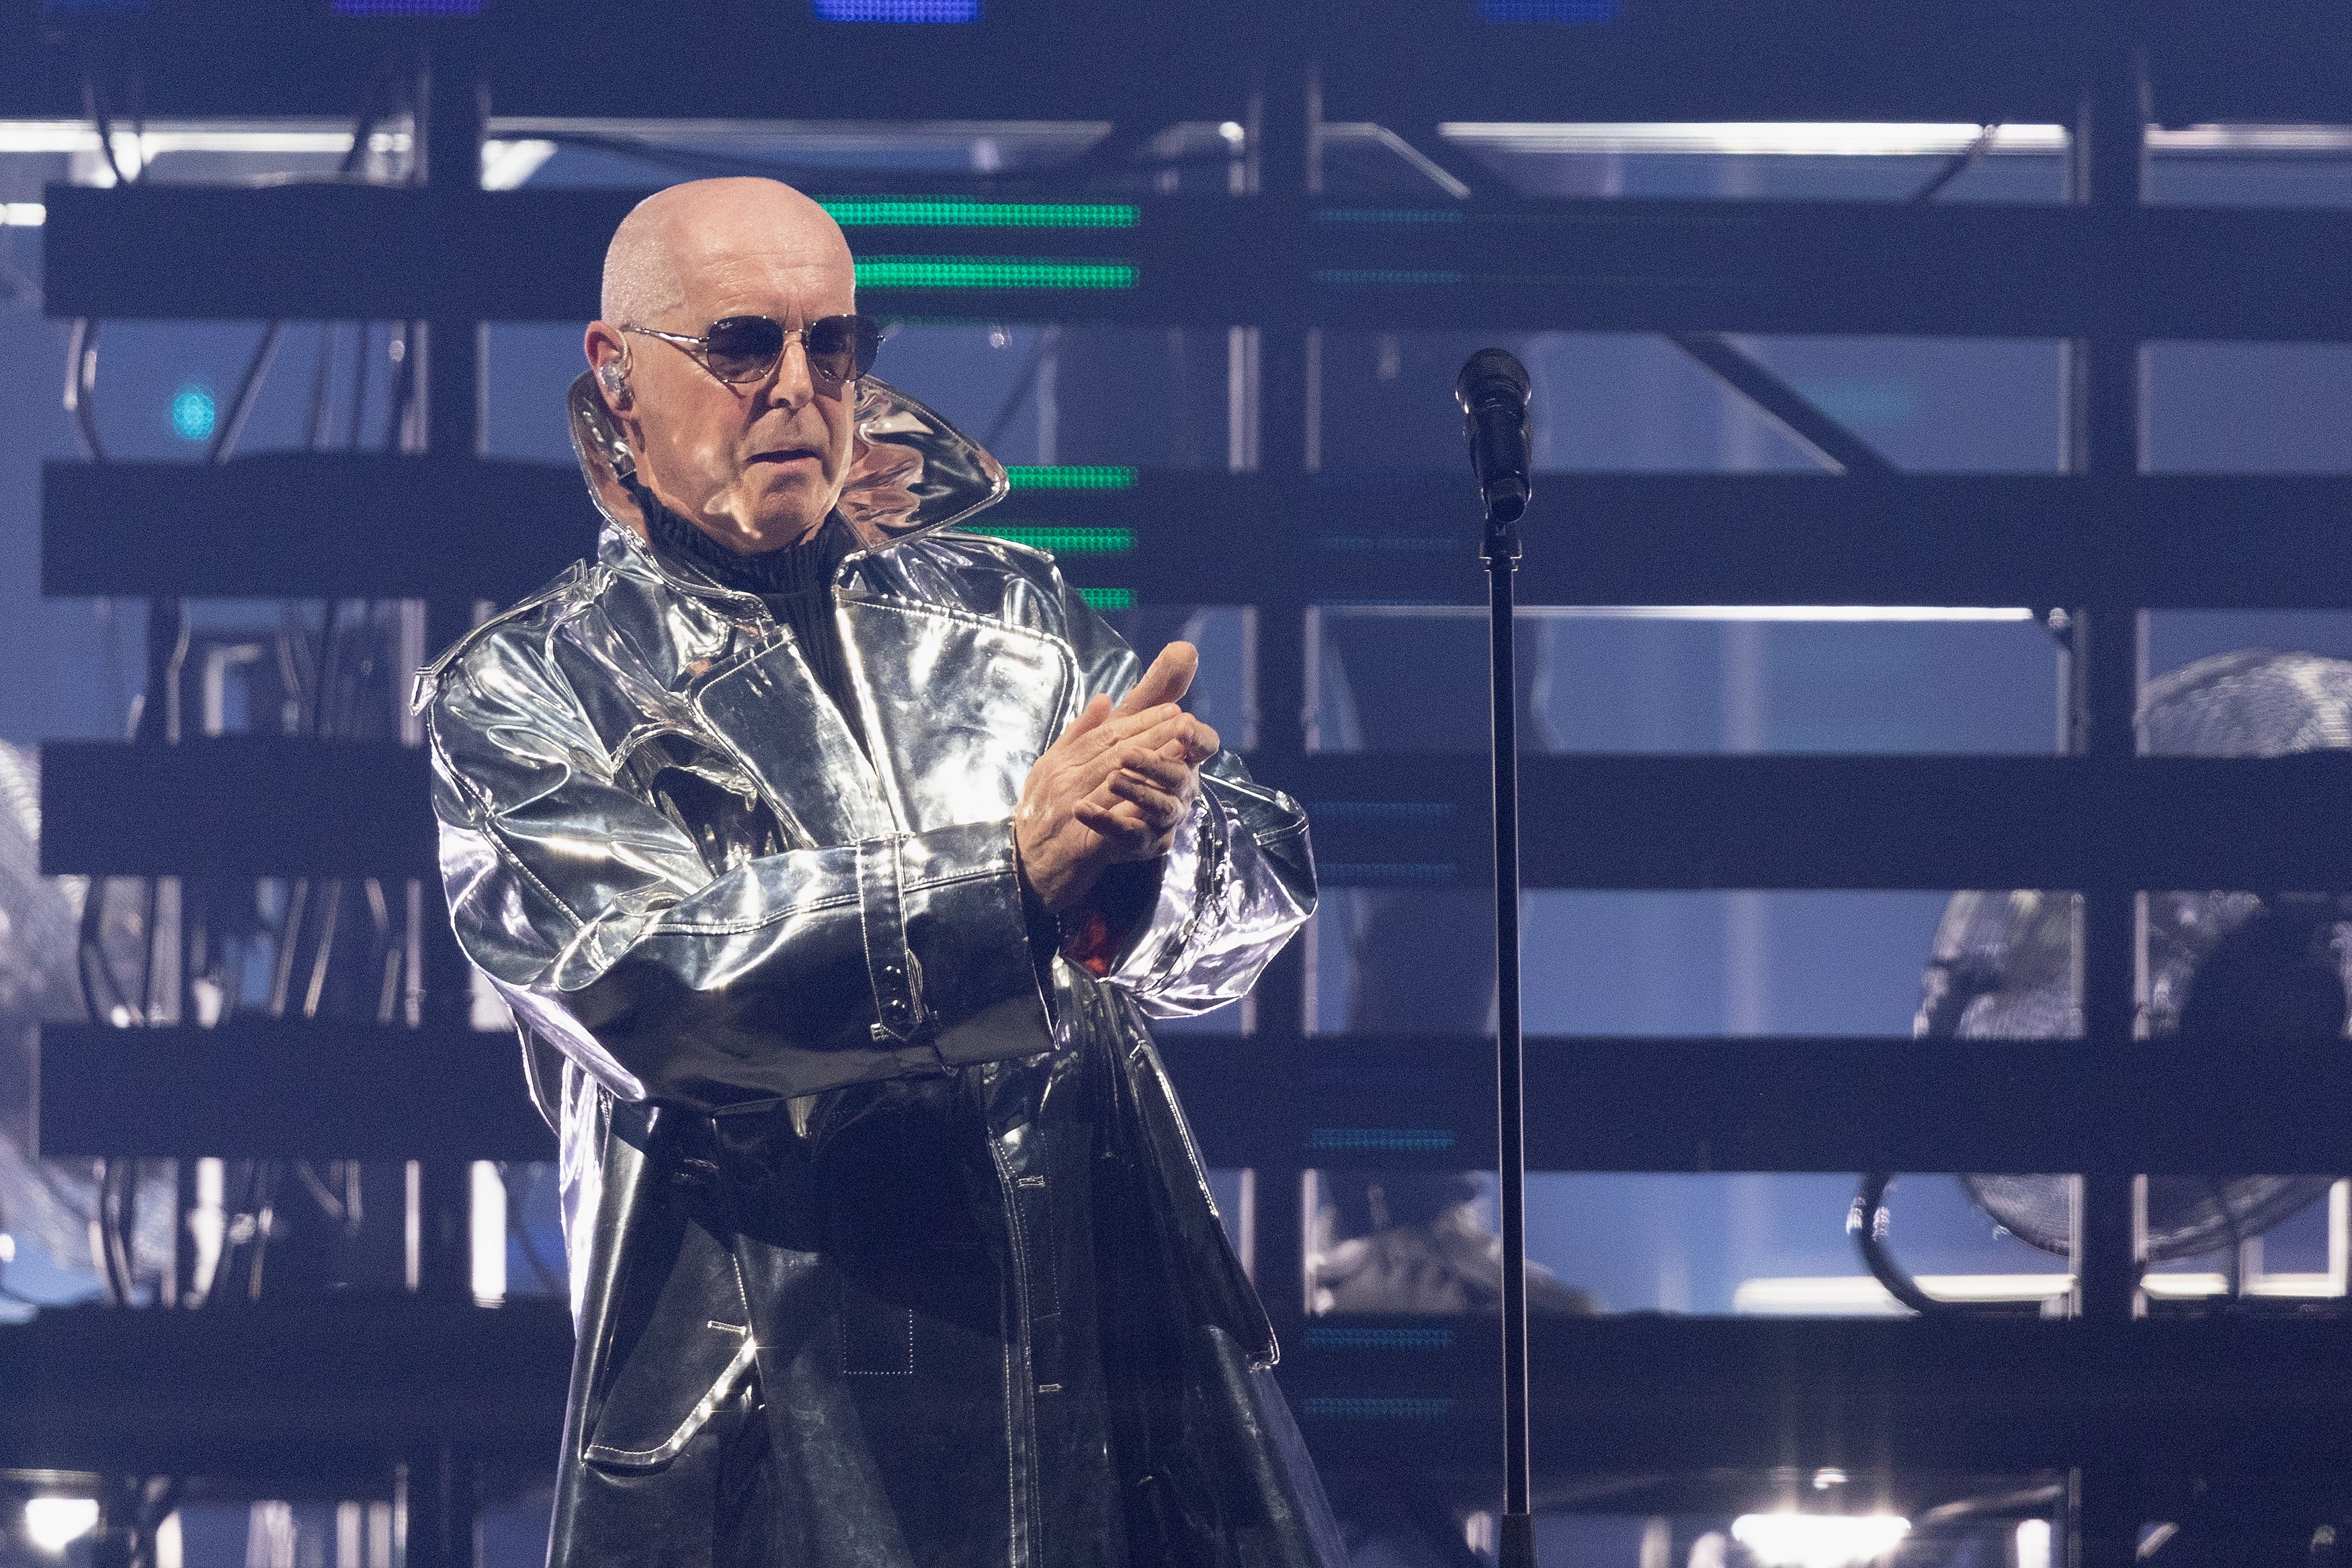 The Pet Shop Boys will headline Isle of Wight Festival next year